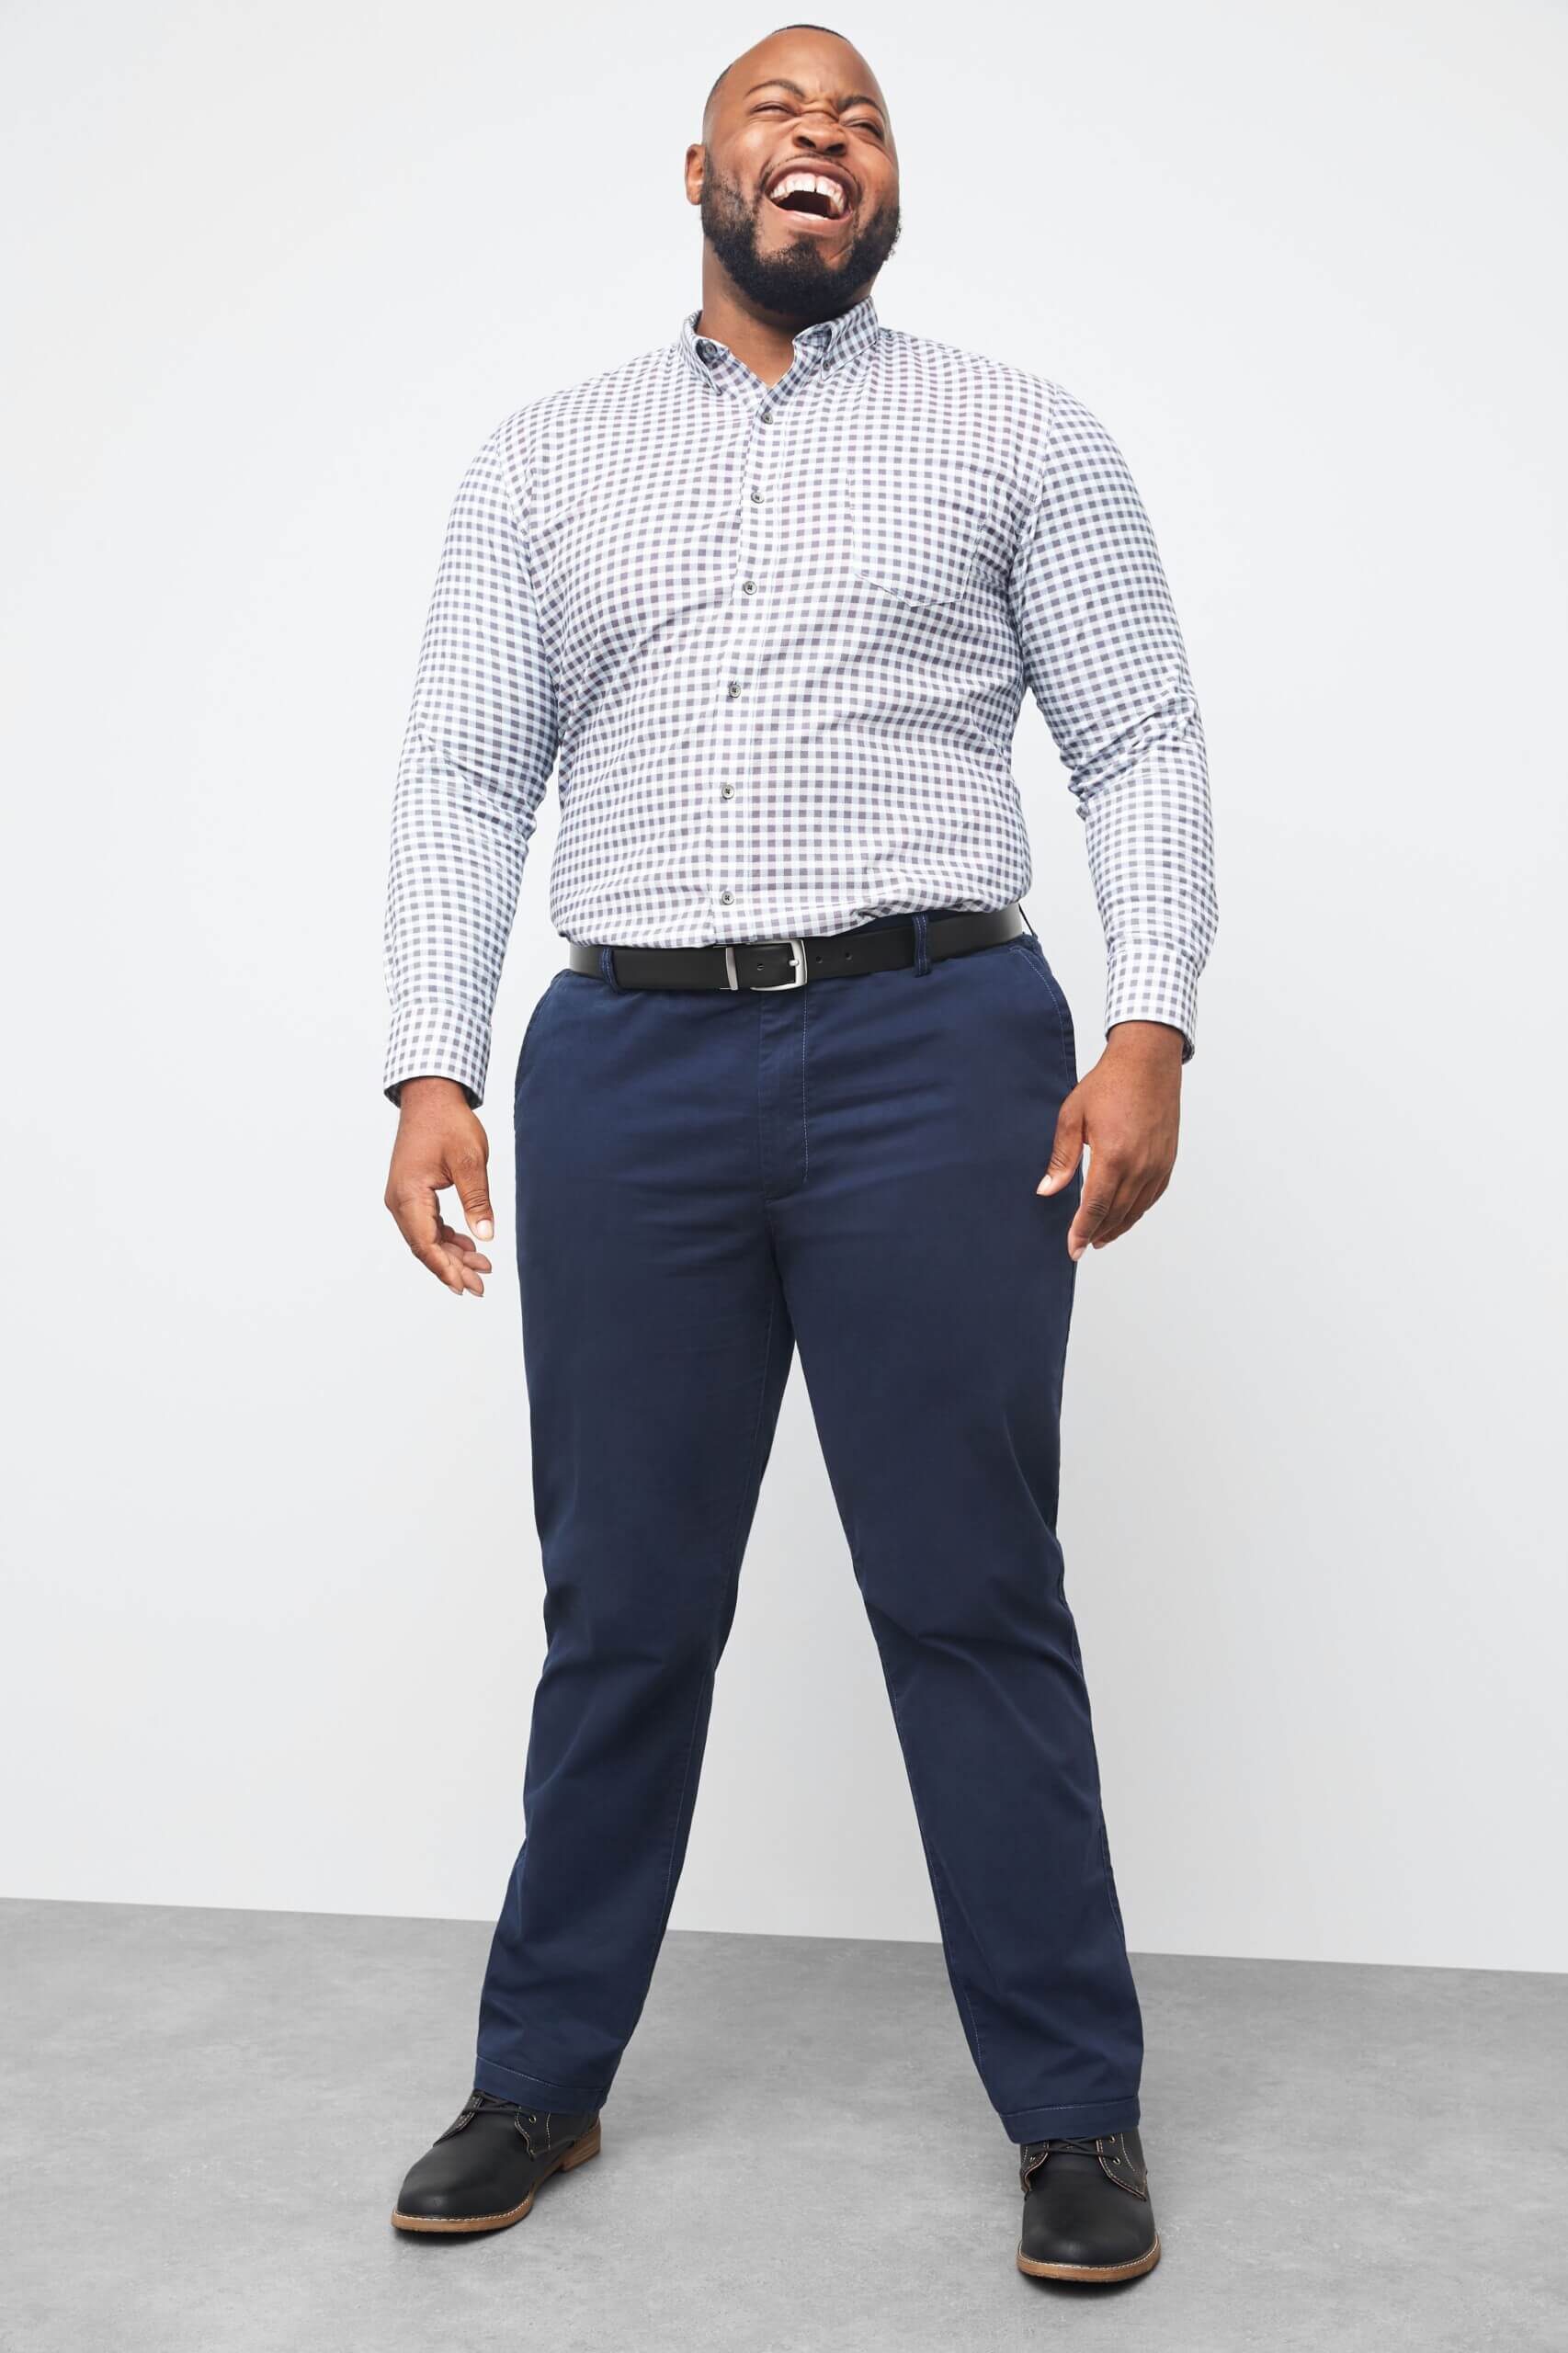 Men's Big and Tall Clothing